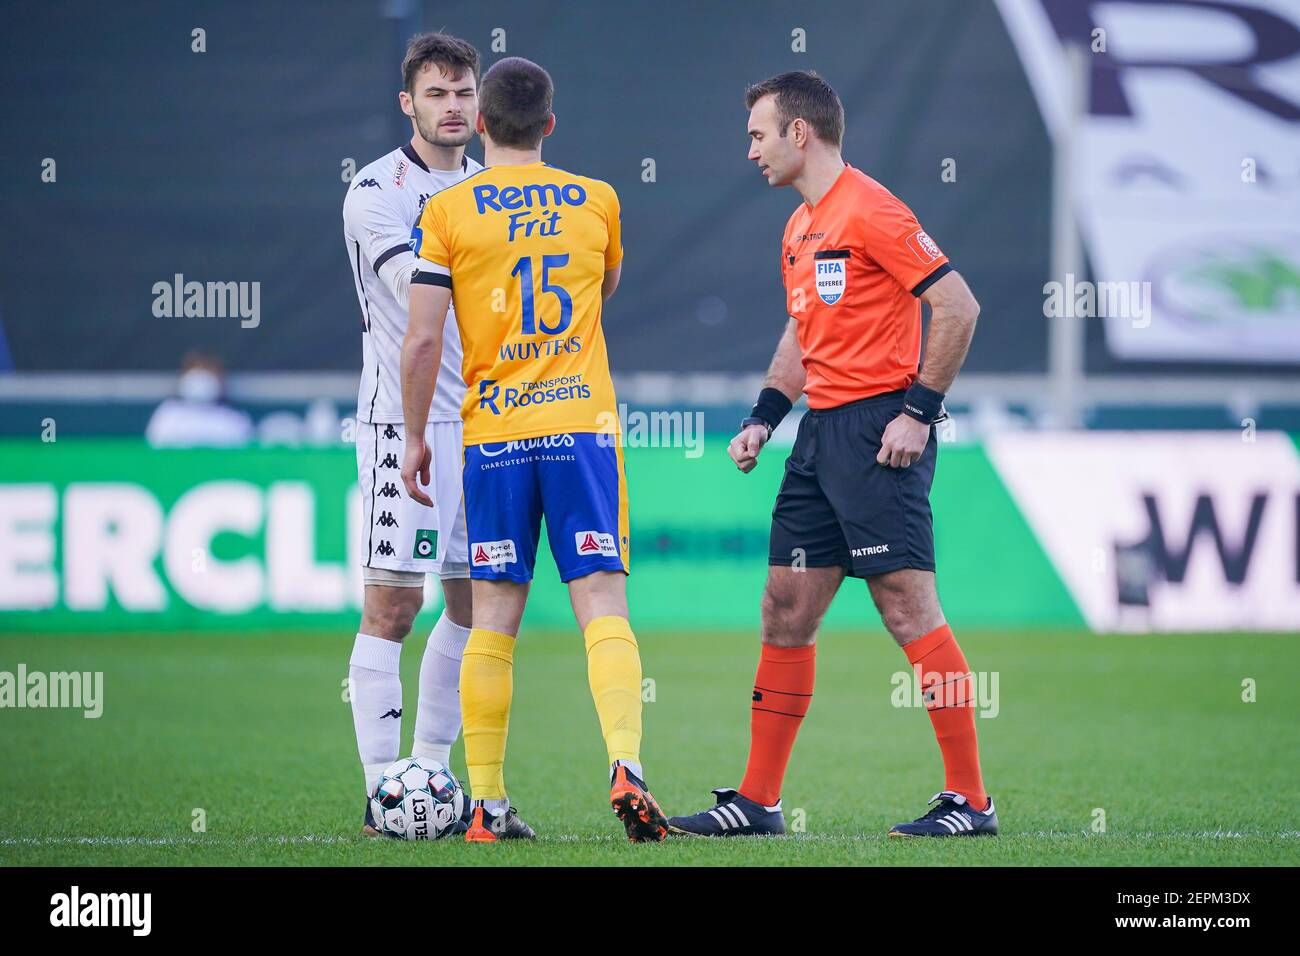 BRUGES, BELGIUM - FEBRUARY 27: Goalkeeper Thomas Didillon of Cercle Brugge, Dries Wuytens (c) of Waasland Beveren, Referee Nicolas Laforge during the Stock Photo